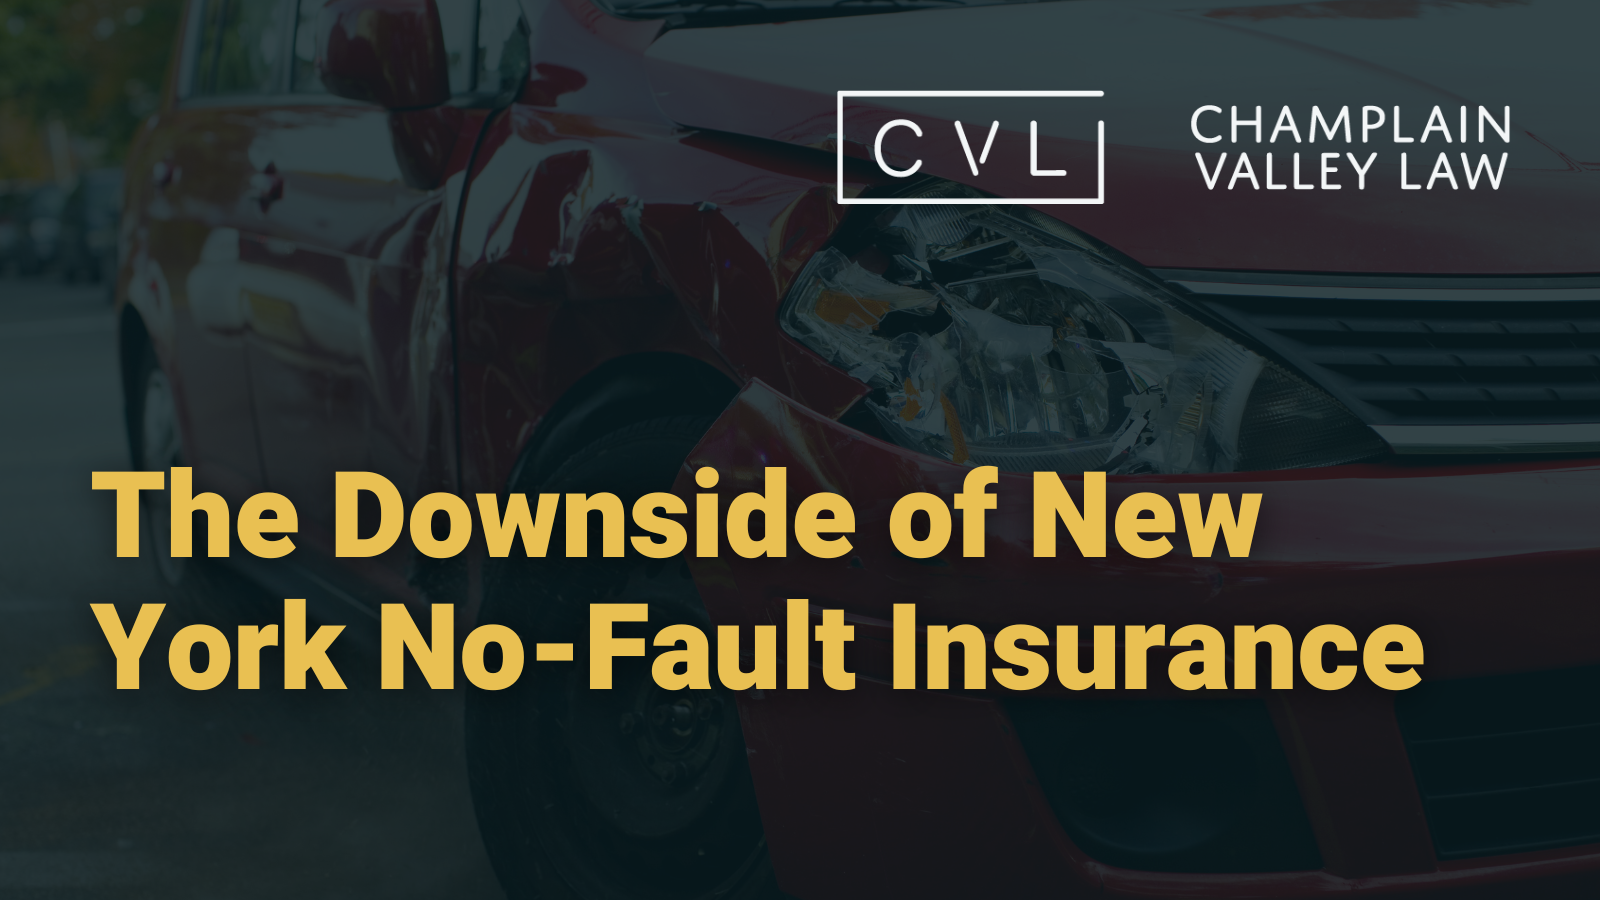 The Downside of New York No-Fault Insurance